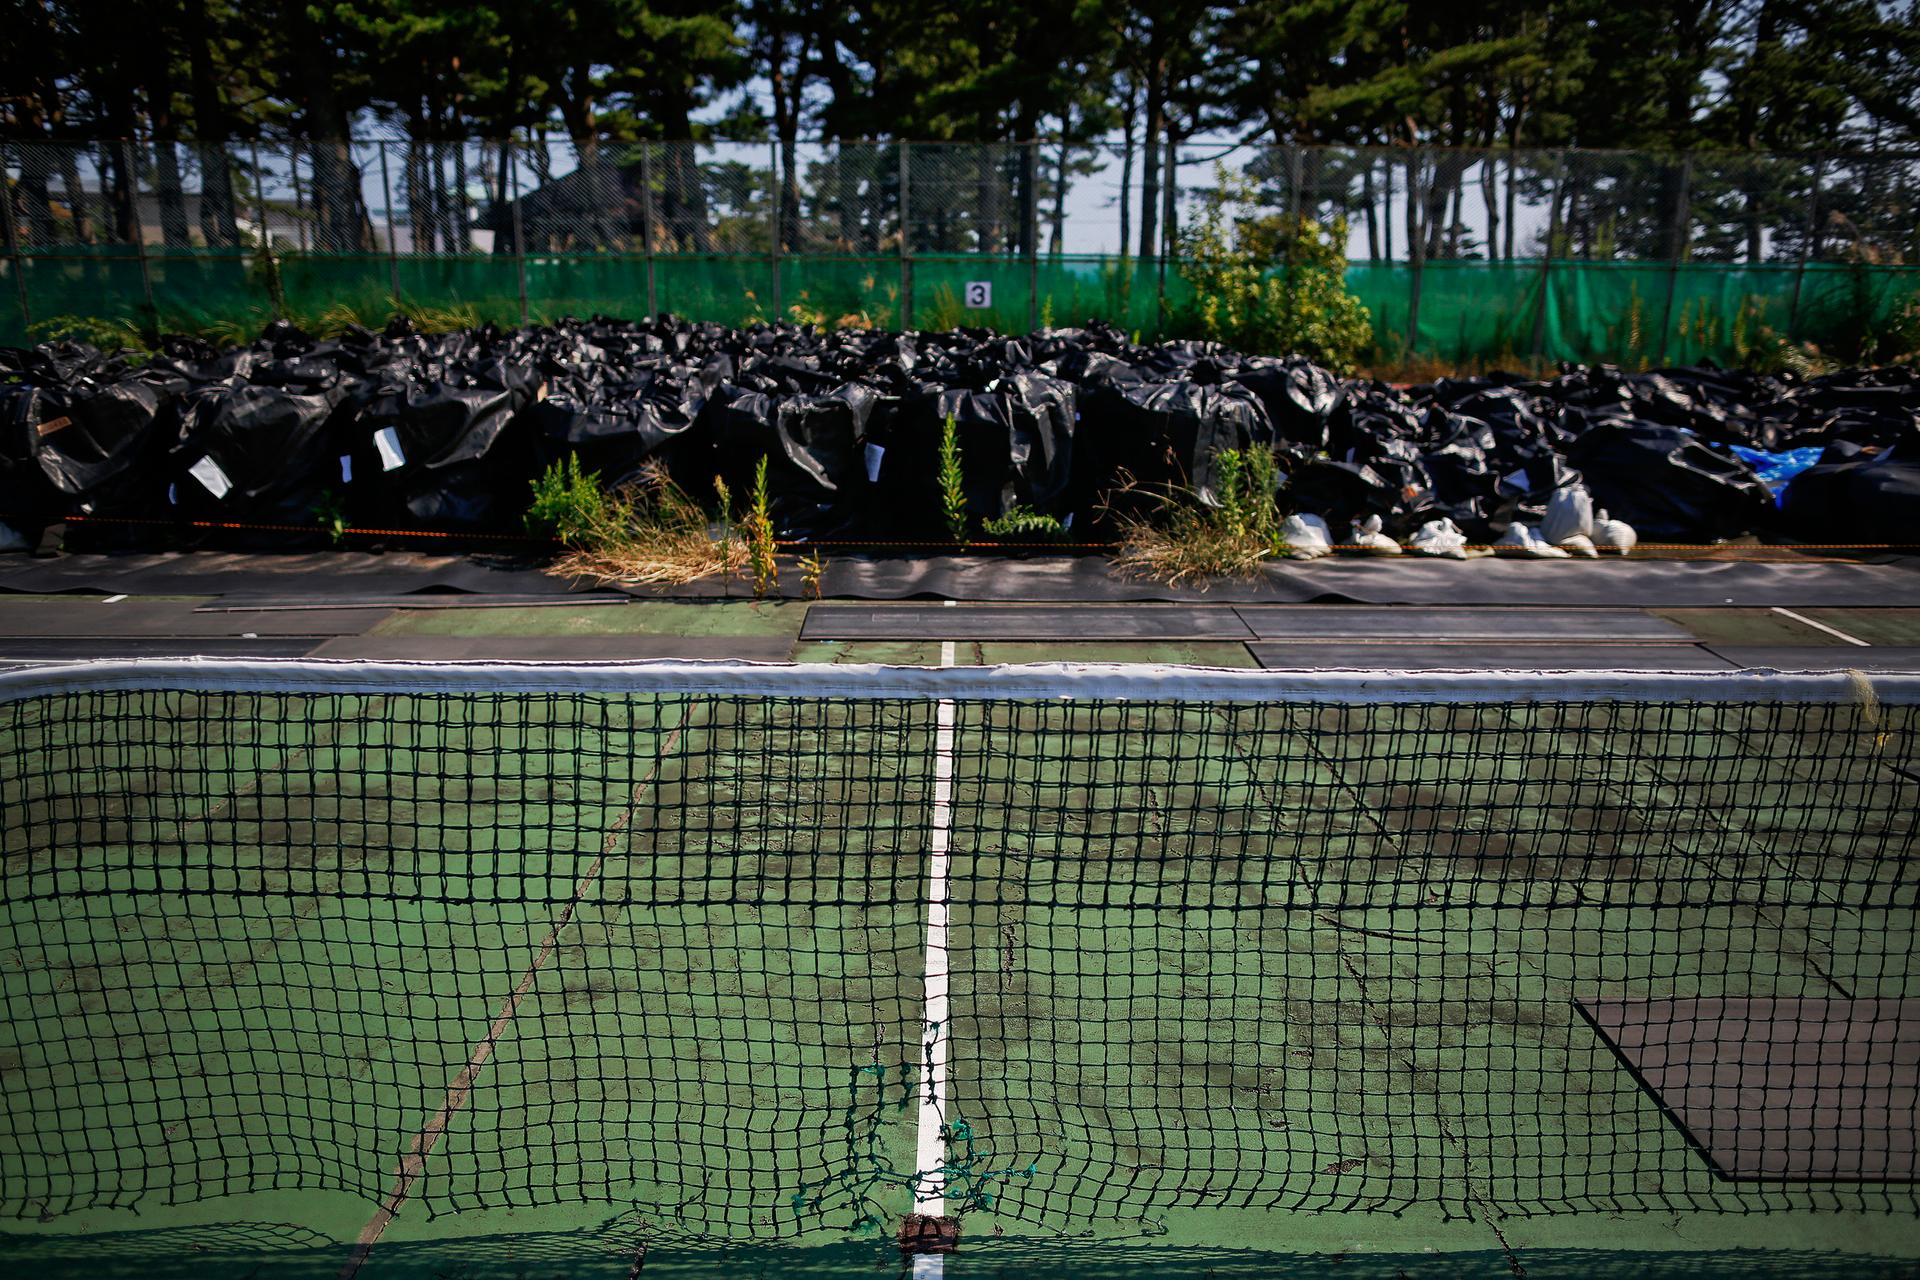 Big plastic bags containing radiated soil, leaves and debris are dumped at a tennis court at a sports park near the Fukushima Daiichi nuclear power plant